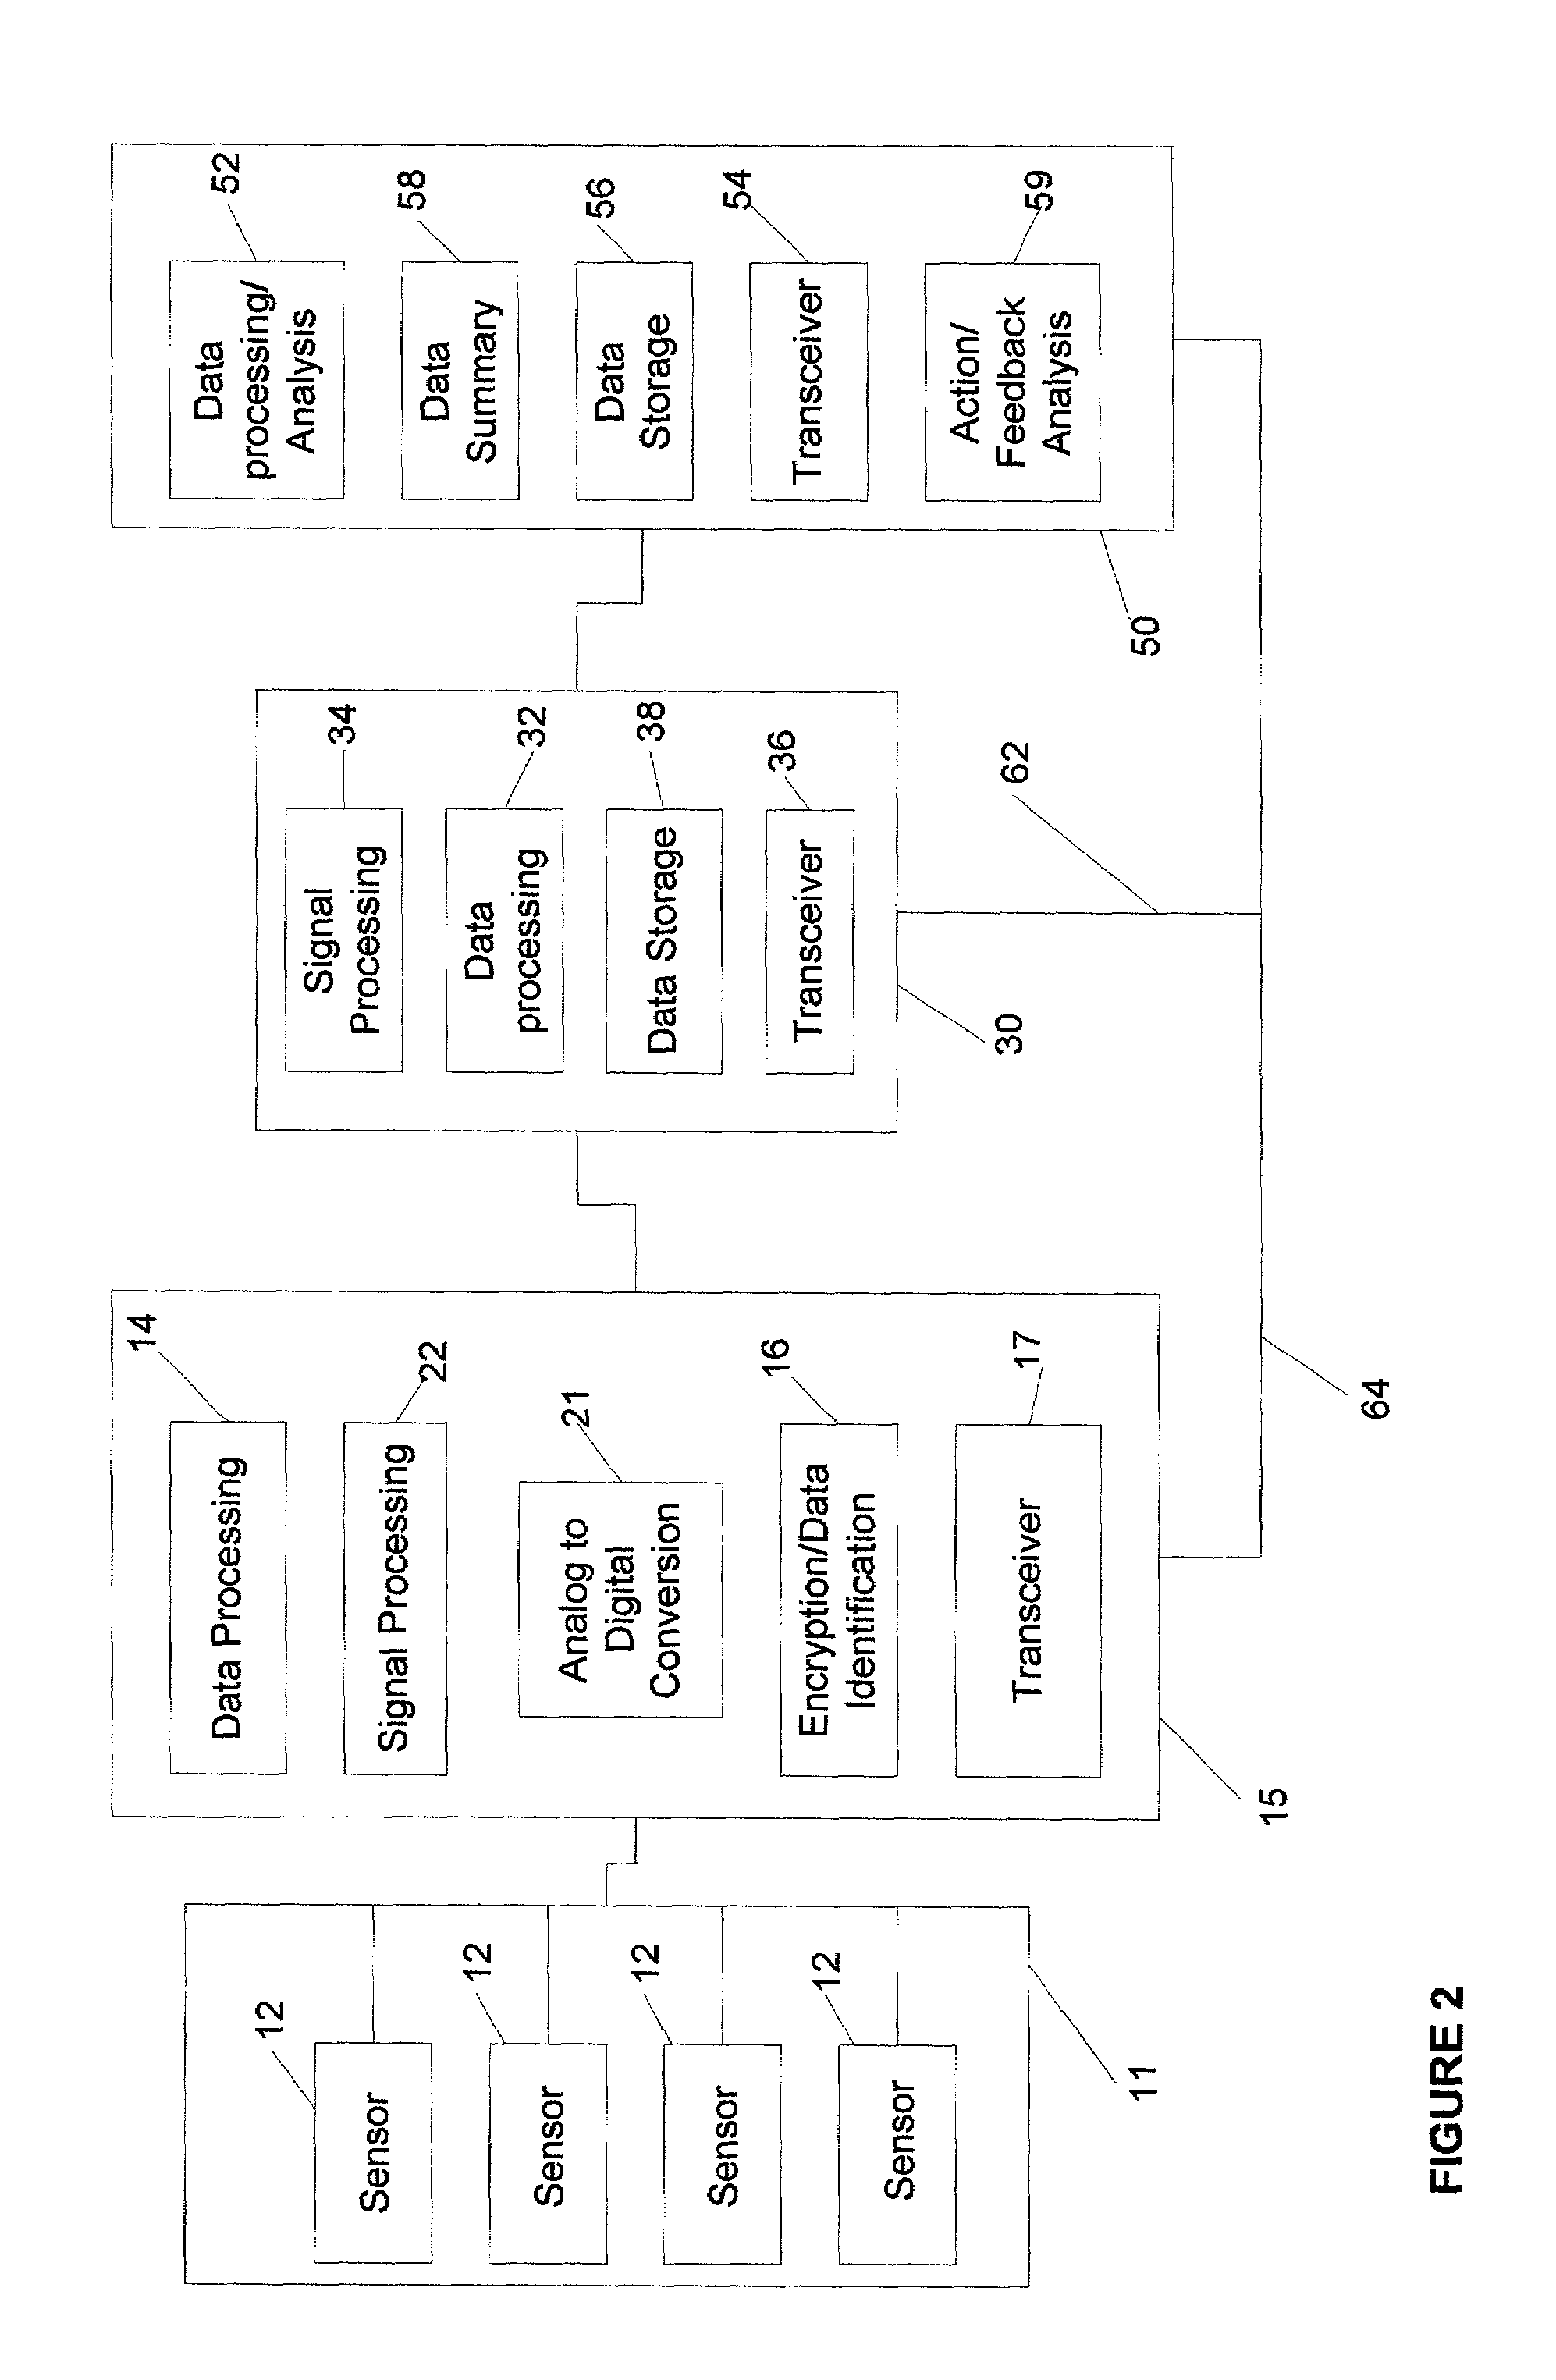 Gateway platform for biological monitoring and delivery of therapeutic compounds